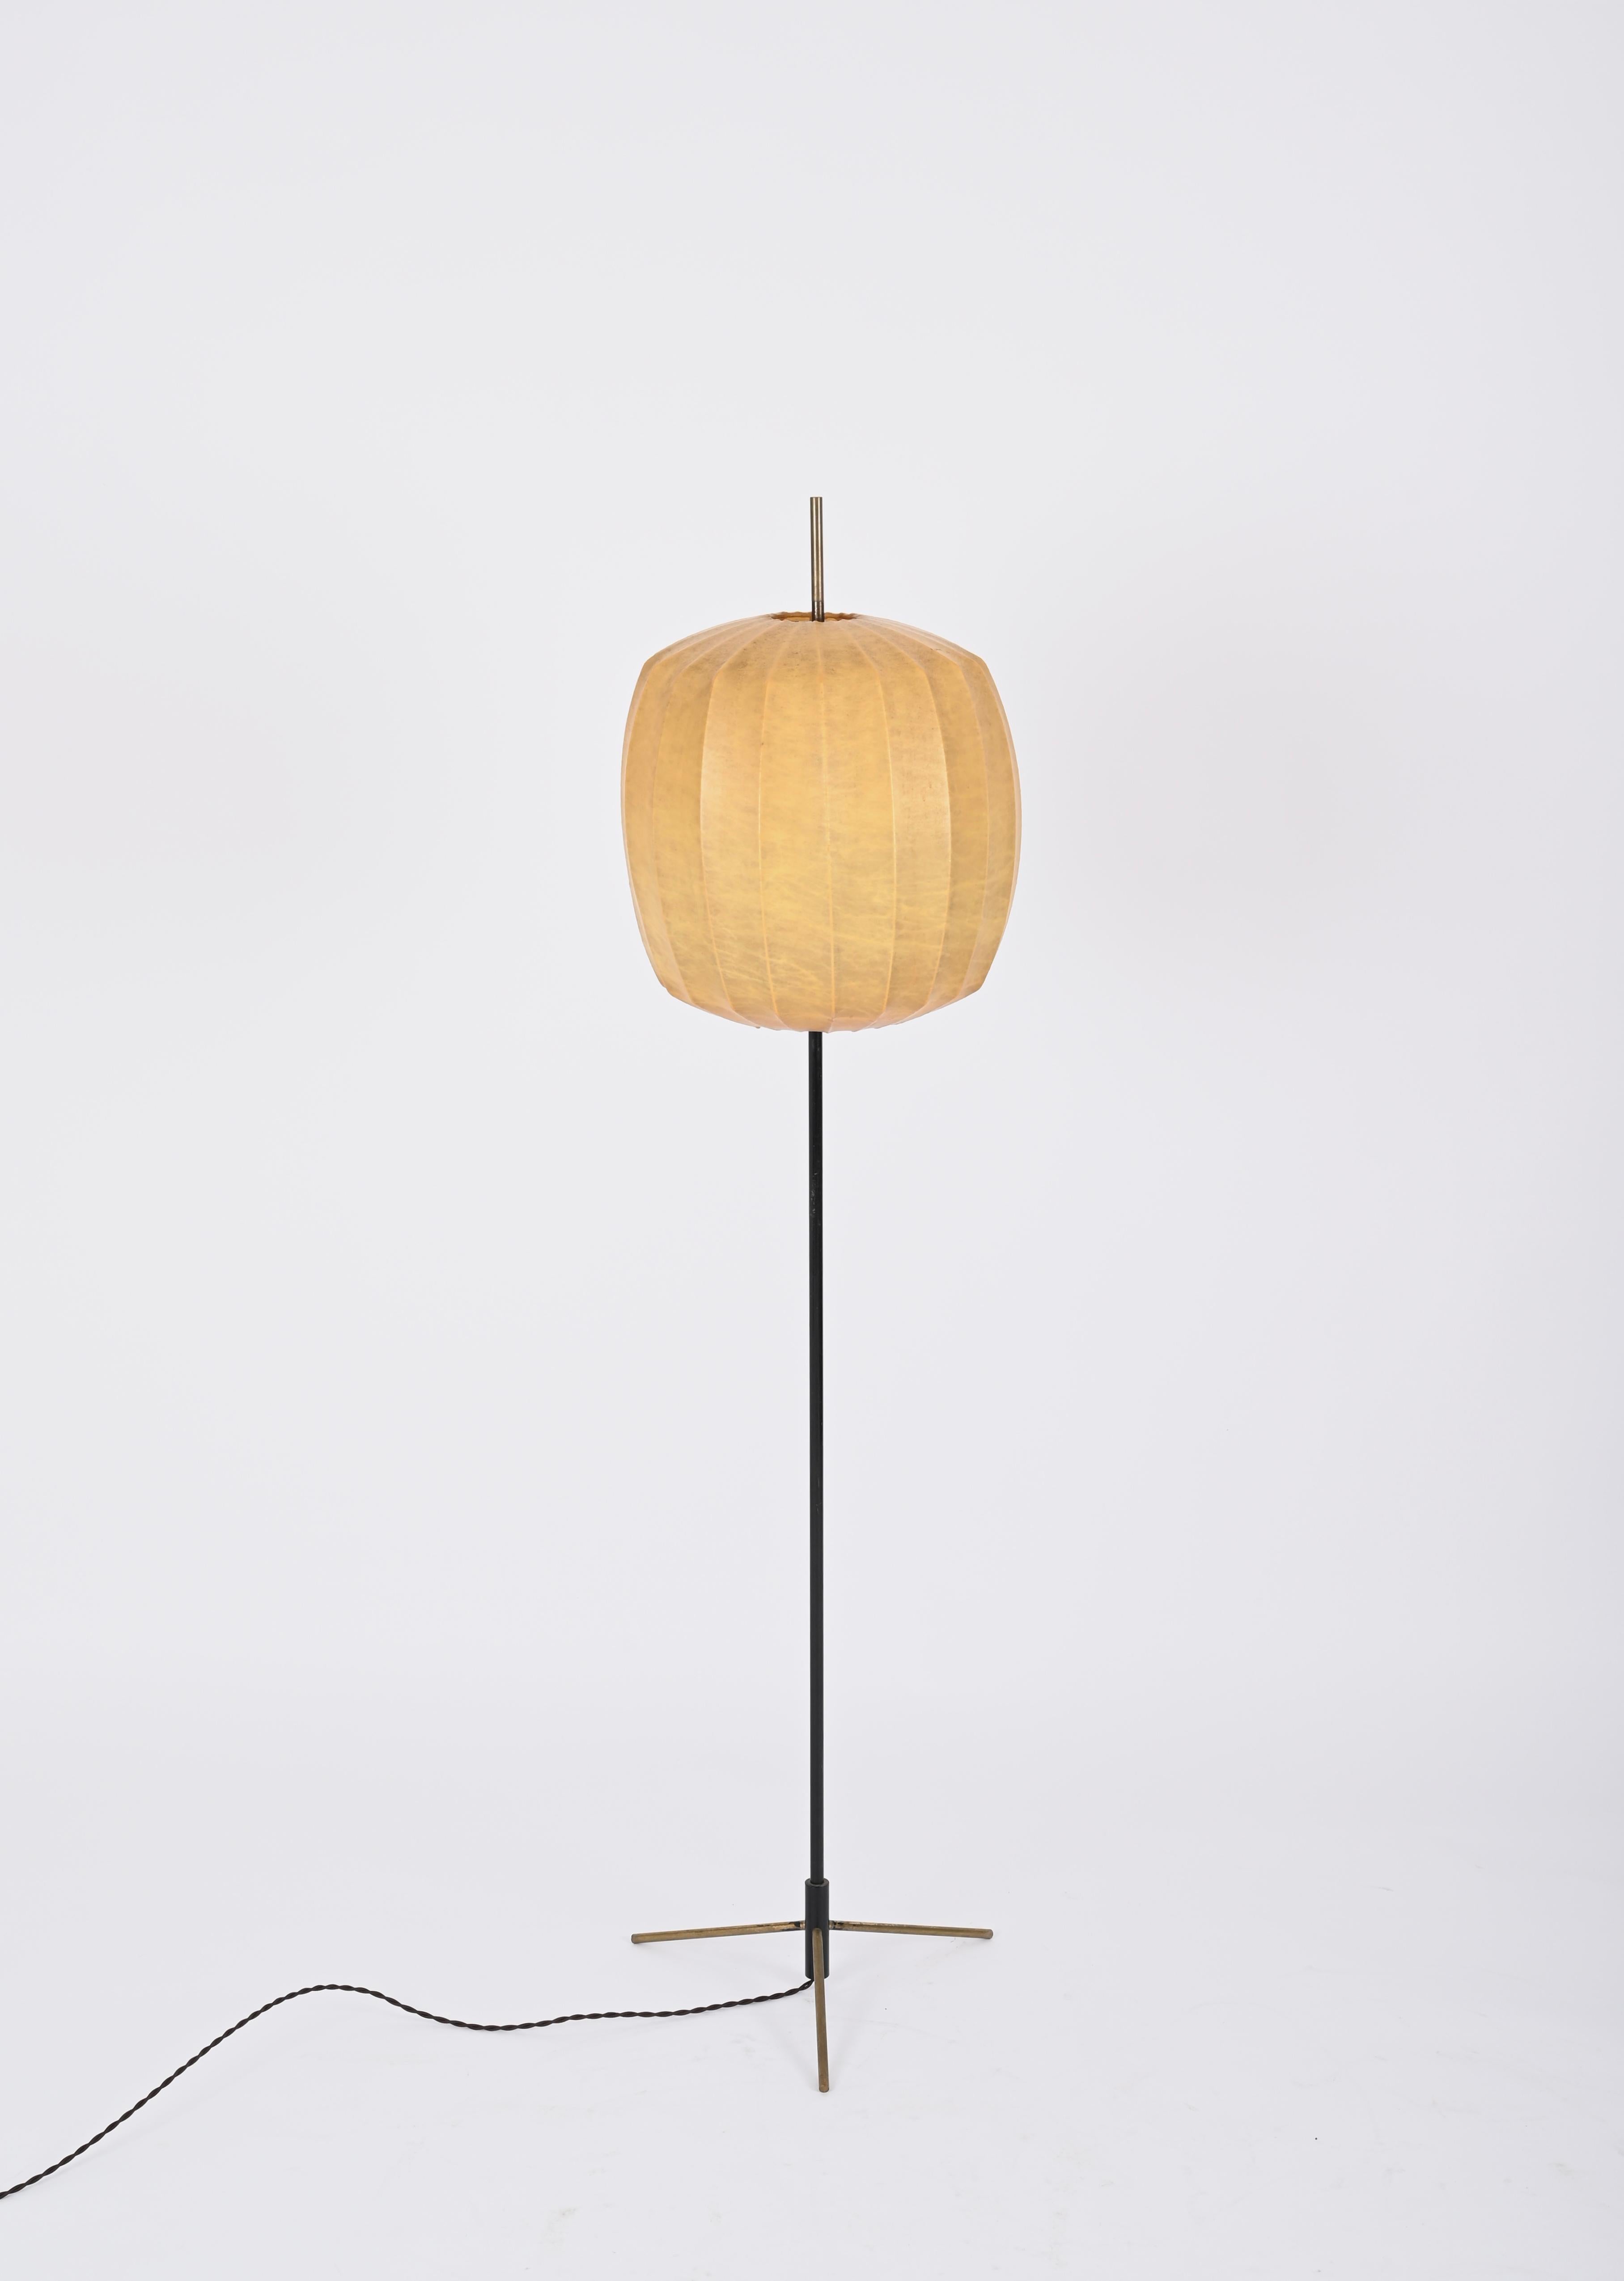 Stunning cocoon floor lamp designed by Achille Castiglioni in Italy in the 1960s. 

This breathaking floor cocoon lamp features a lovely structure in black enameled metal with the three feet and the top in solid brass. The cocoon shade has a round